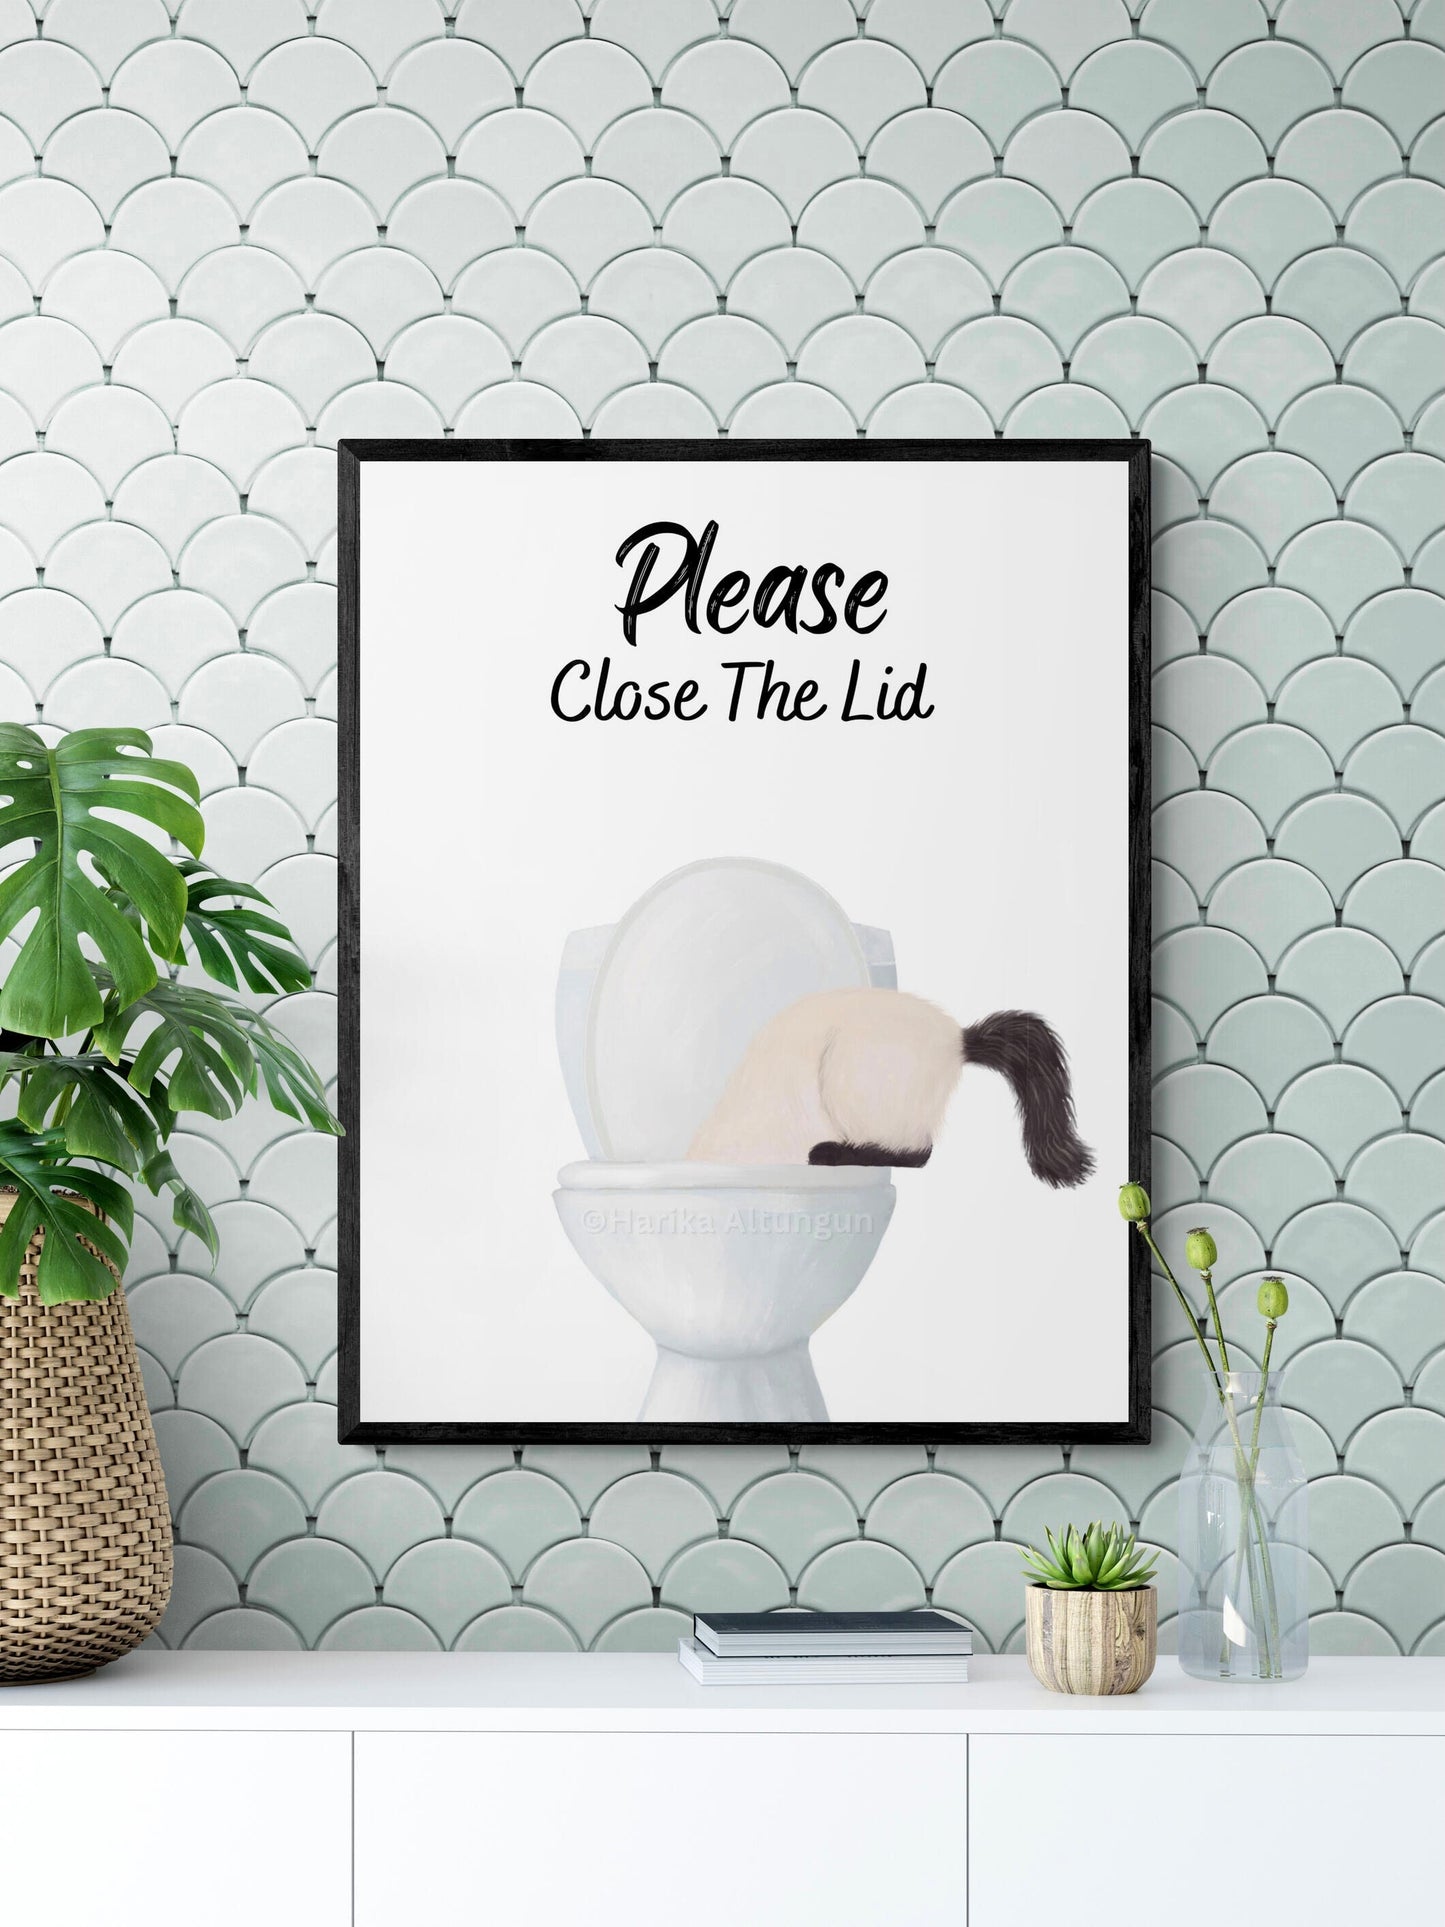 Himalayan Cat Drinking Water From Toilet Sign, Fat Fluffy Cat Print, Bathroom Decor, Cat Painting, Kitty Licking Water From Toilet Art